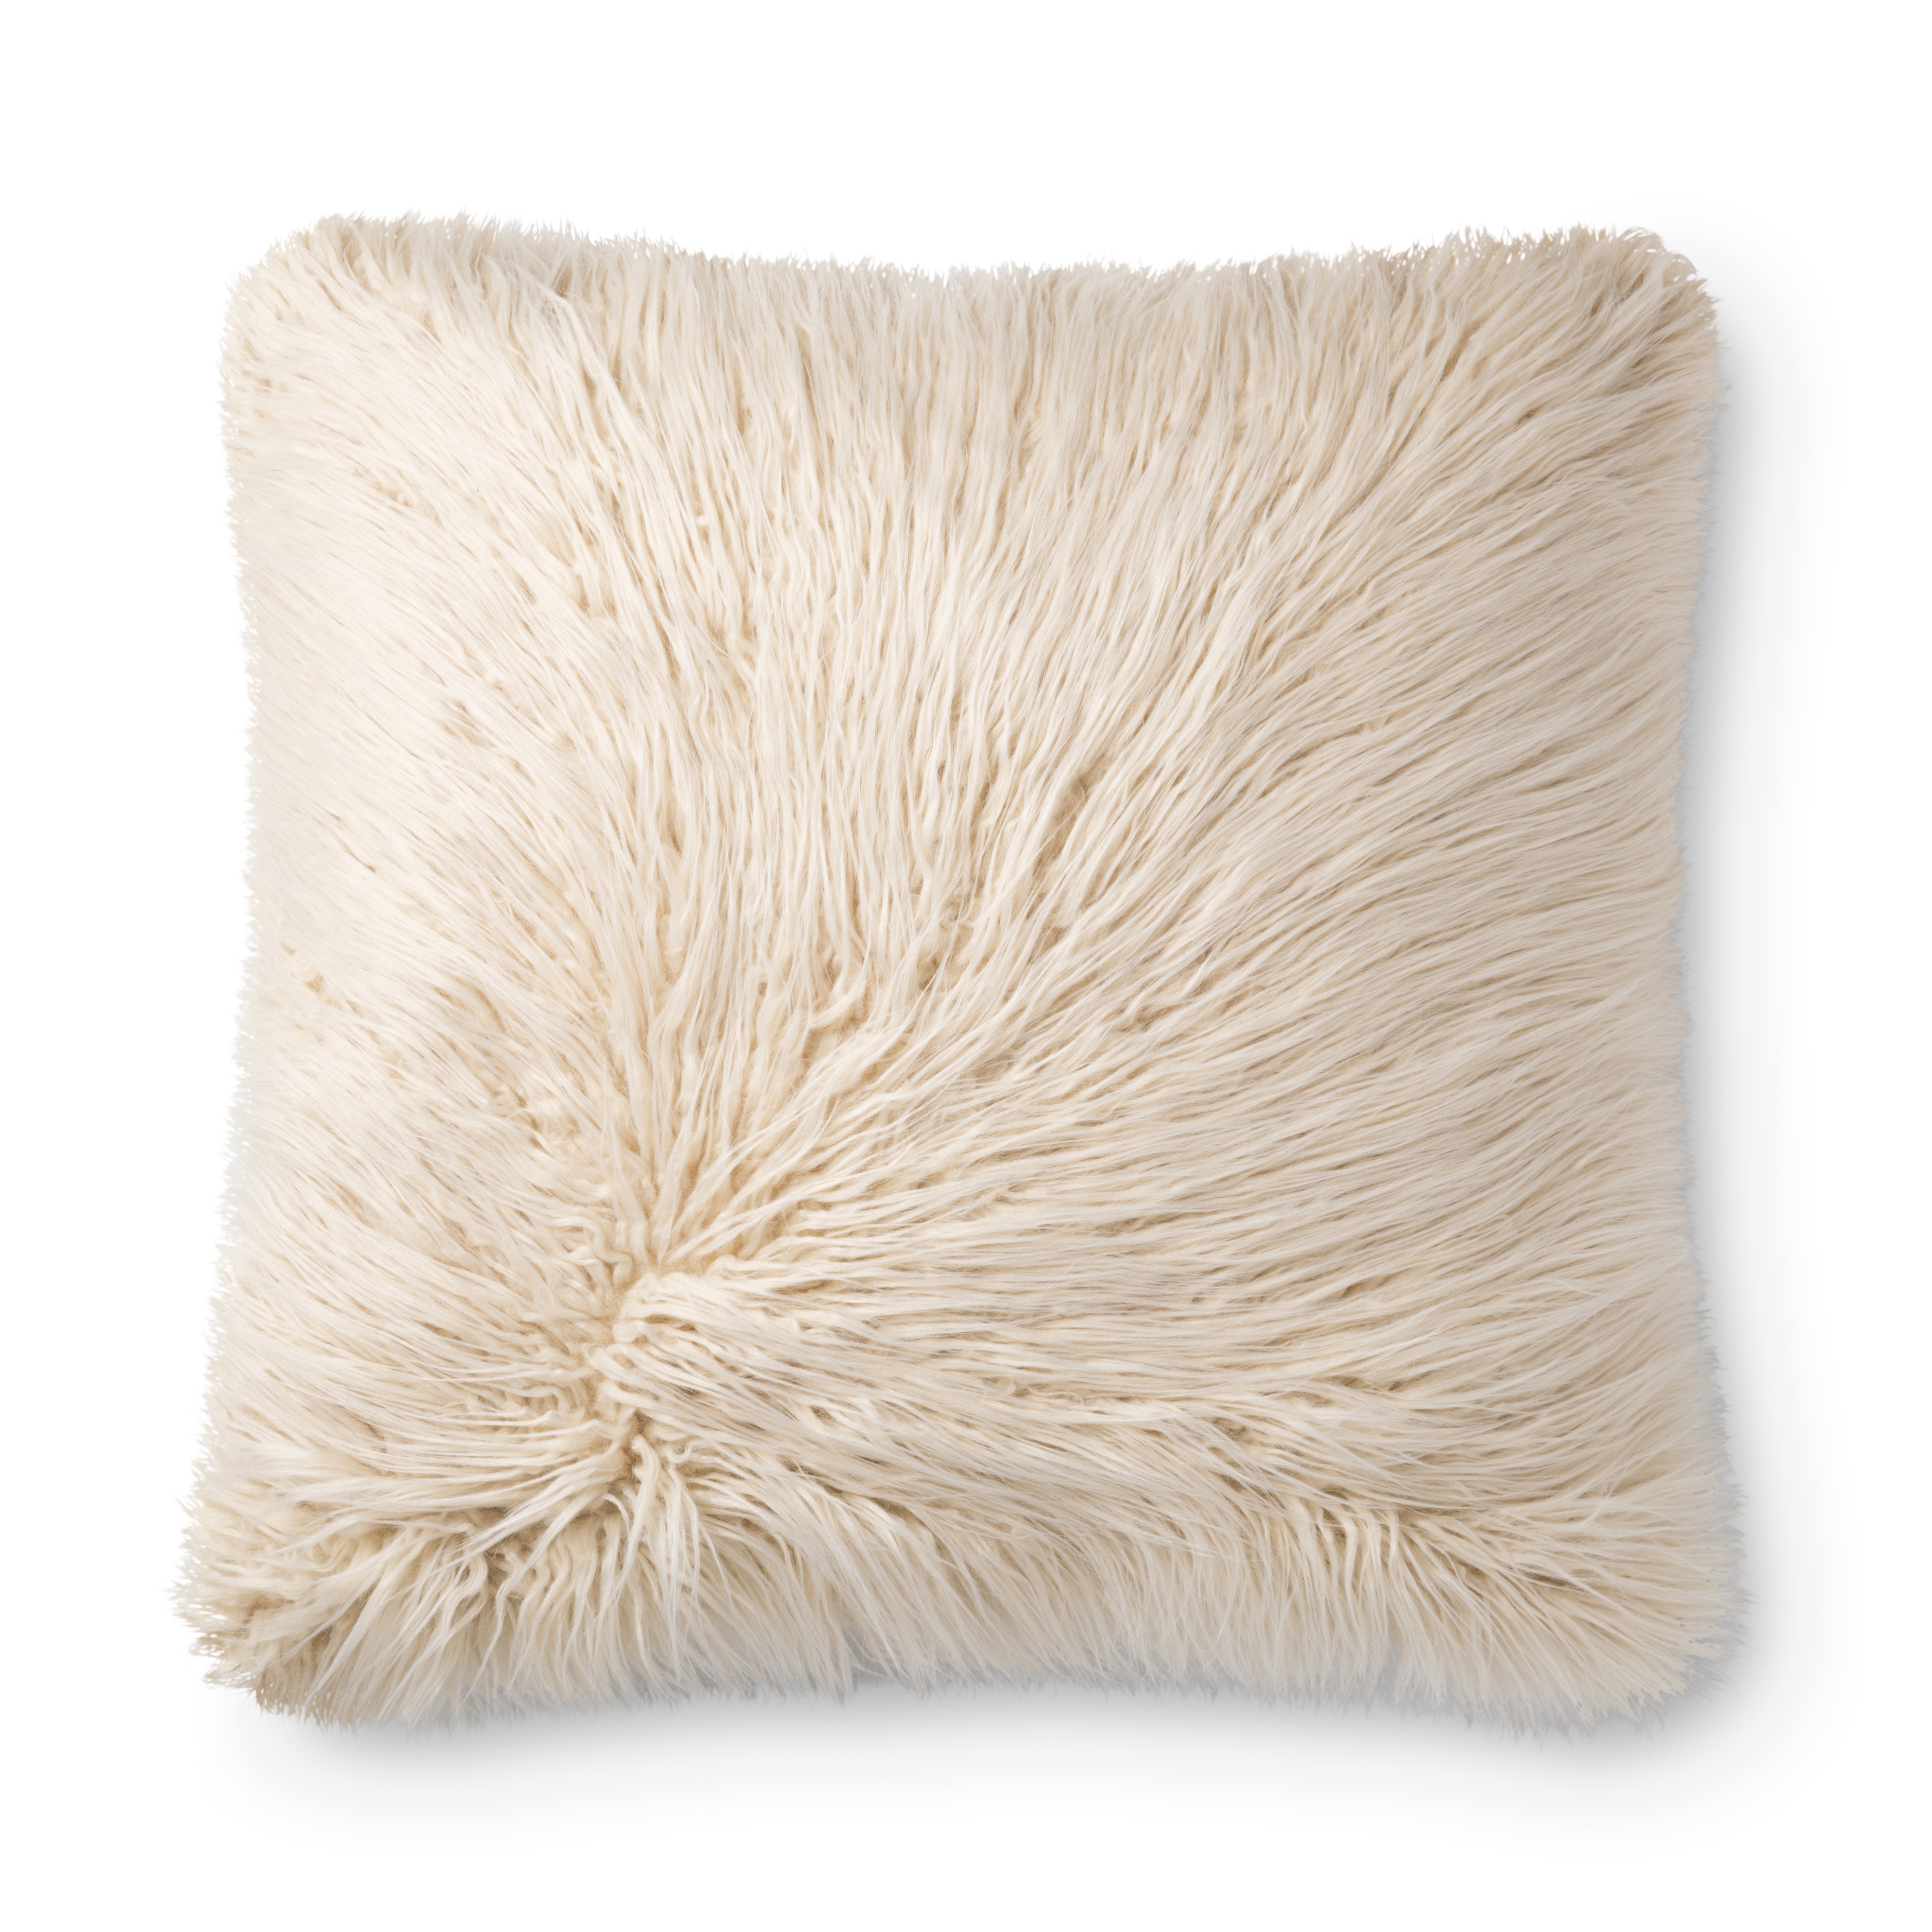 Loloi Pillows P0786 Multi / Ivory 22" x 22" Cover Only - Image 1